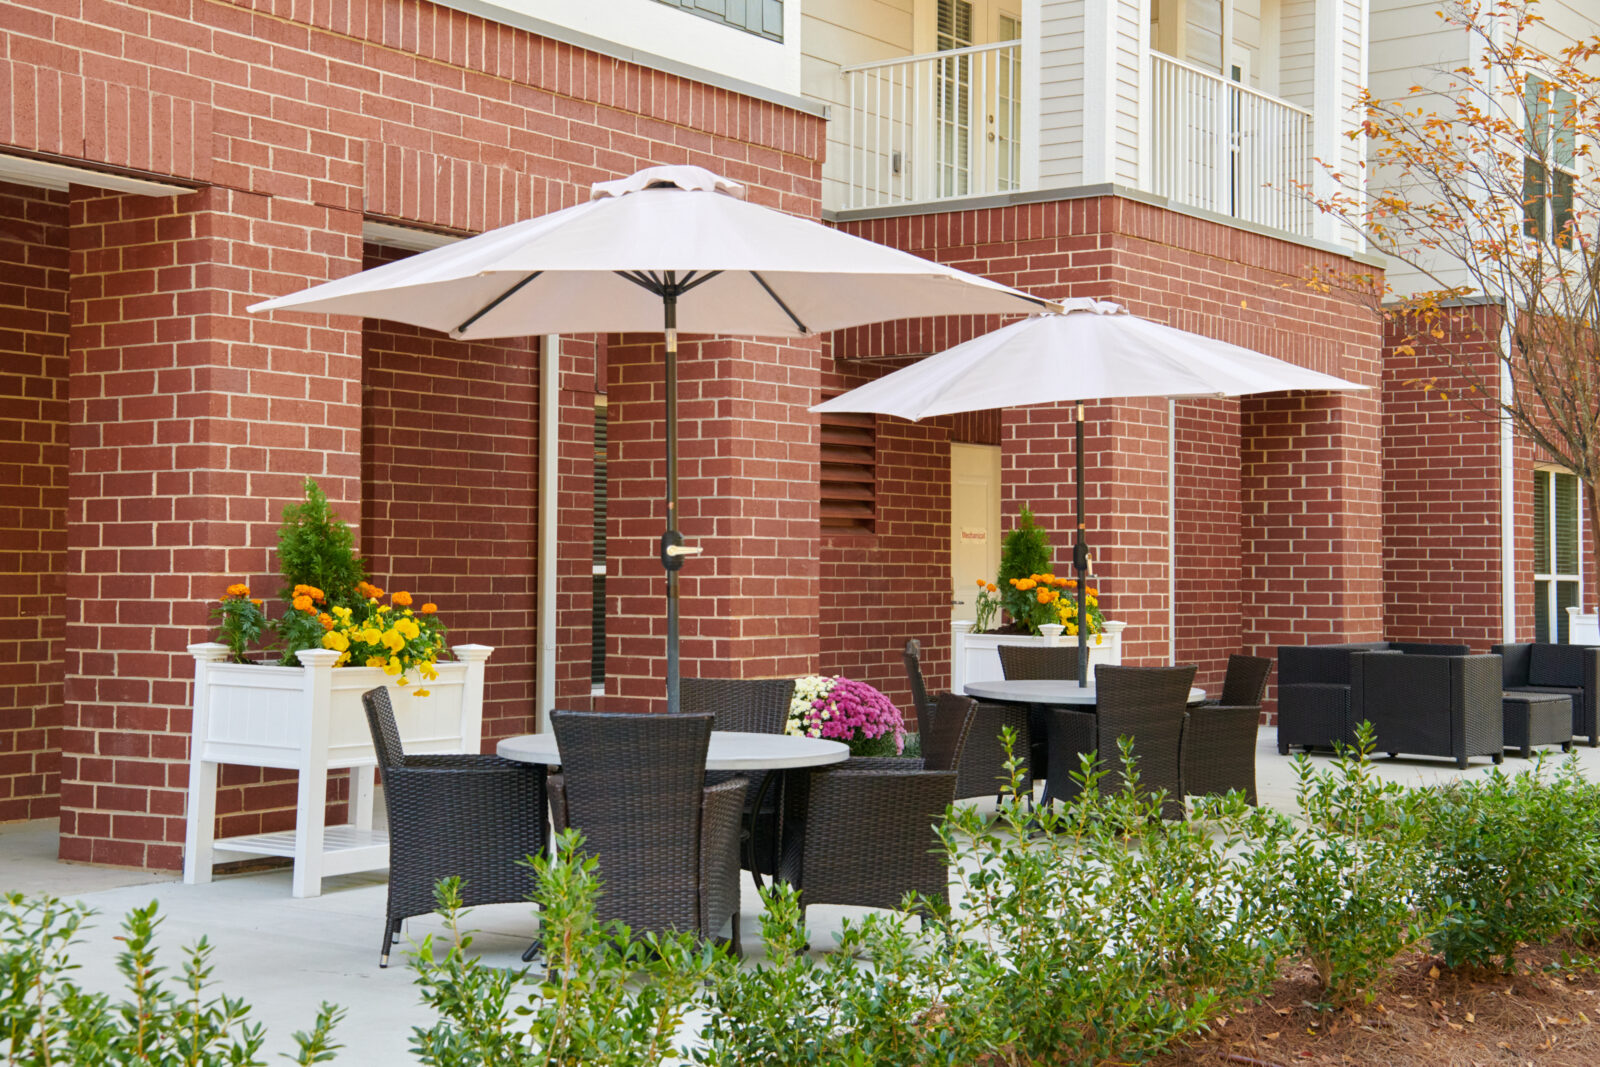 patio with seating an white umbrellas, purple, orange and yellow flowers in pots